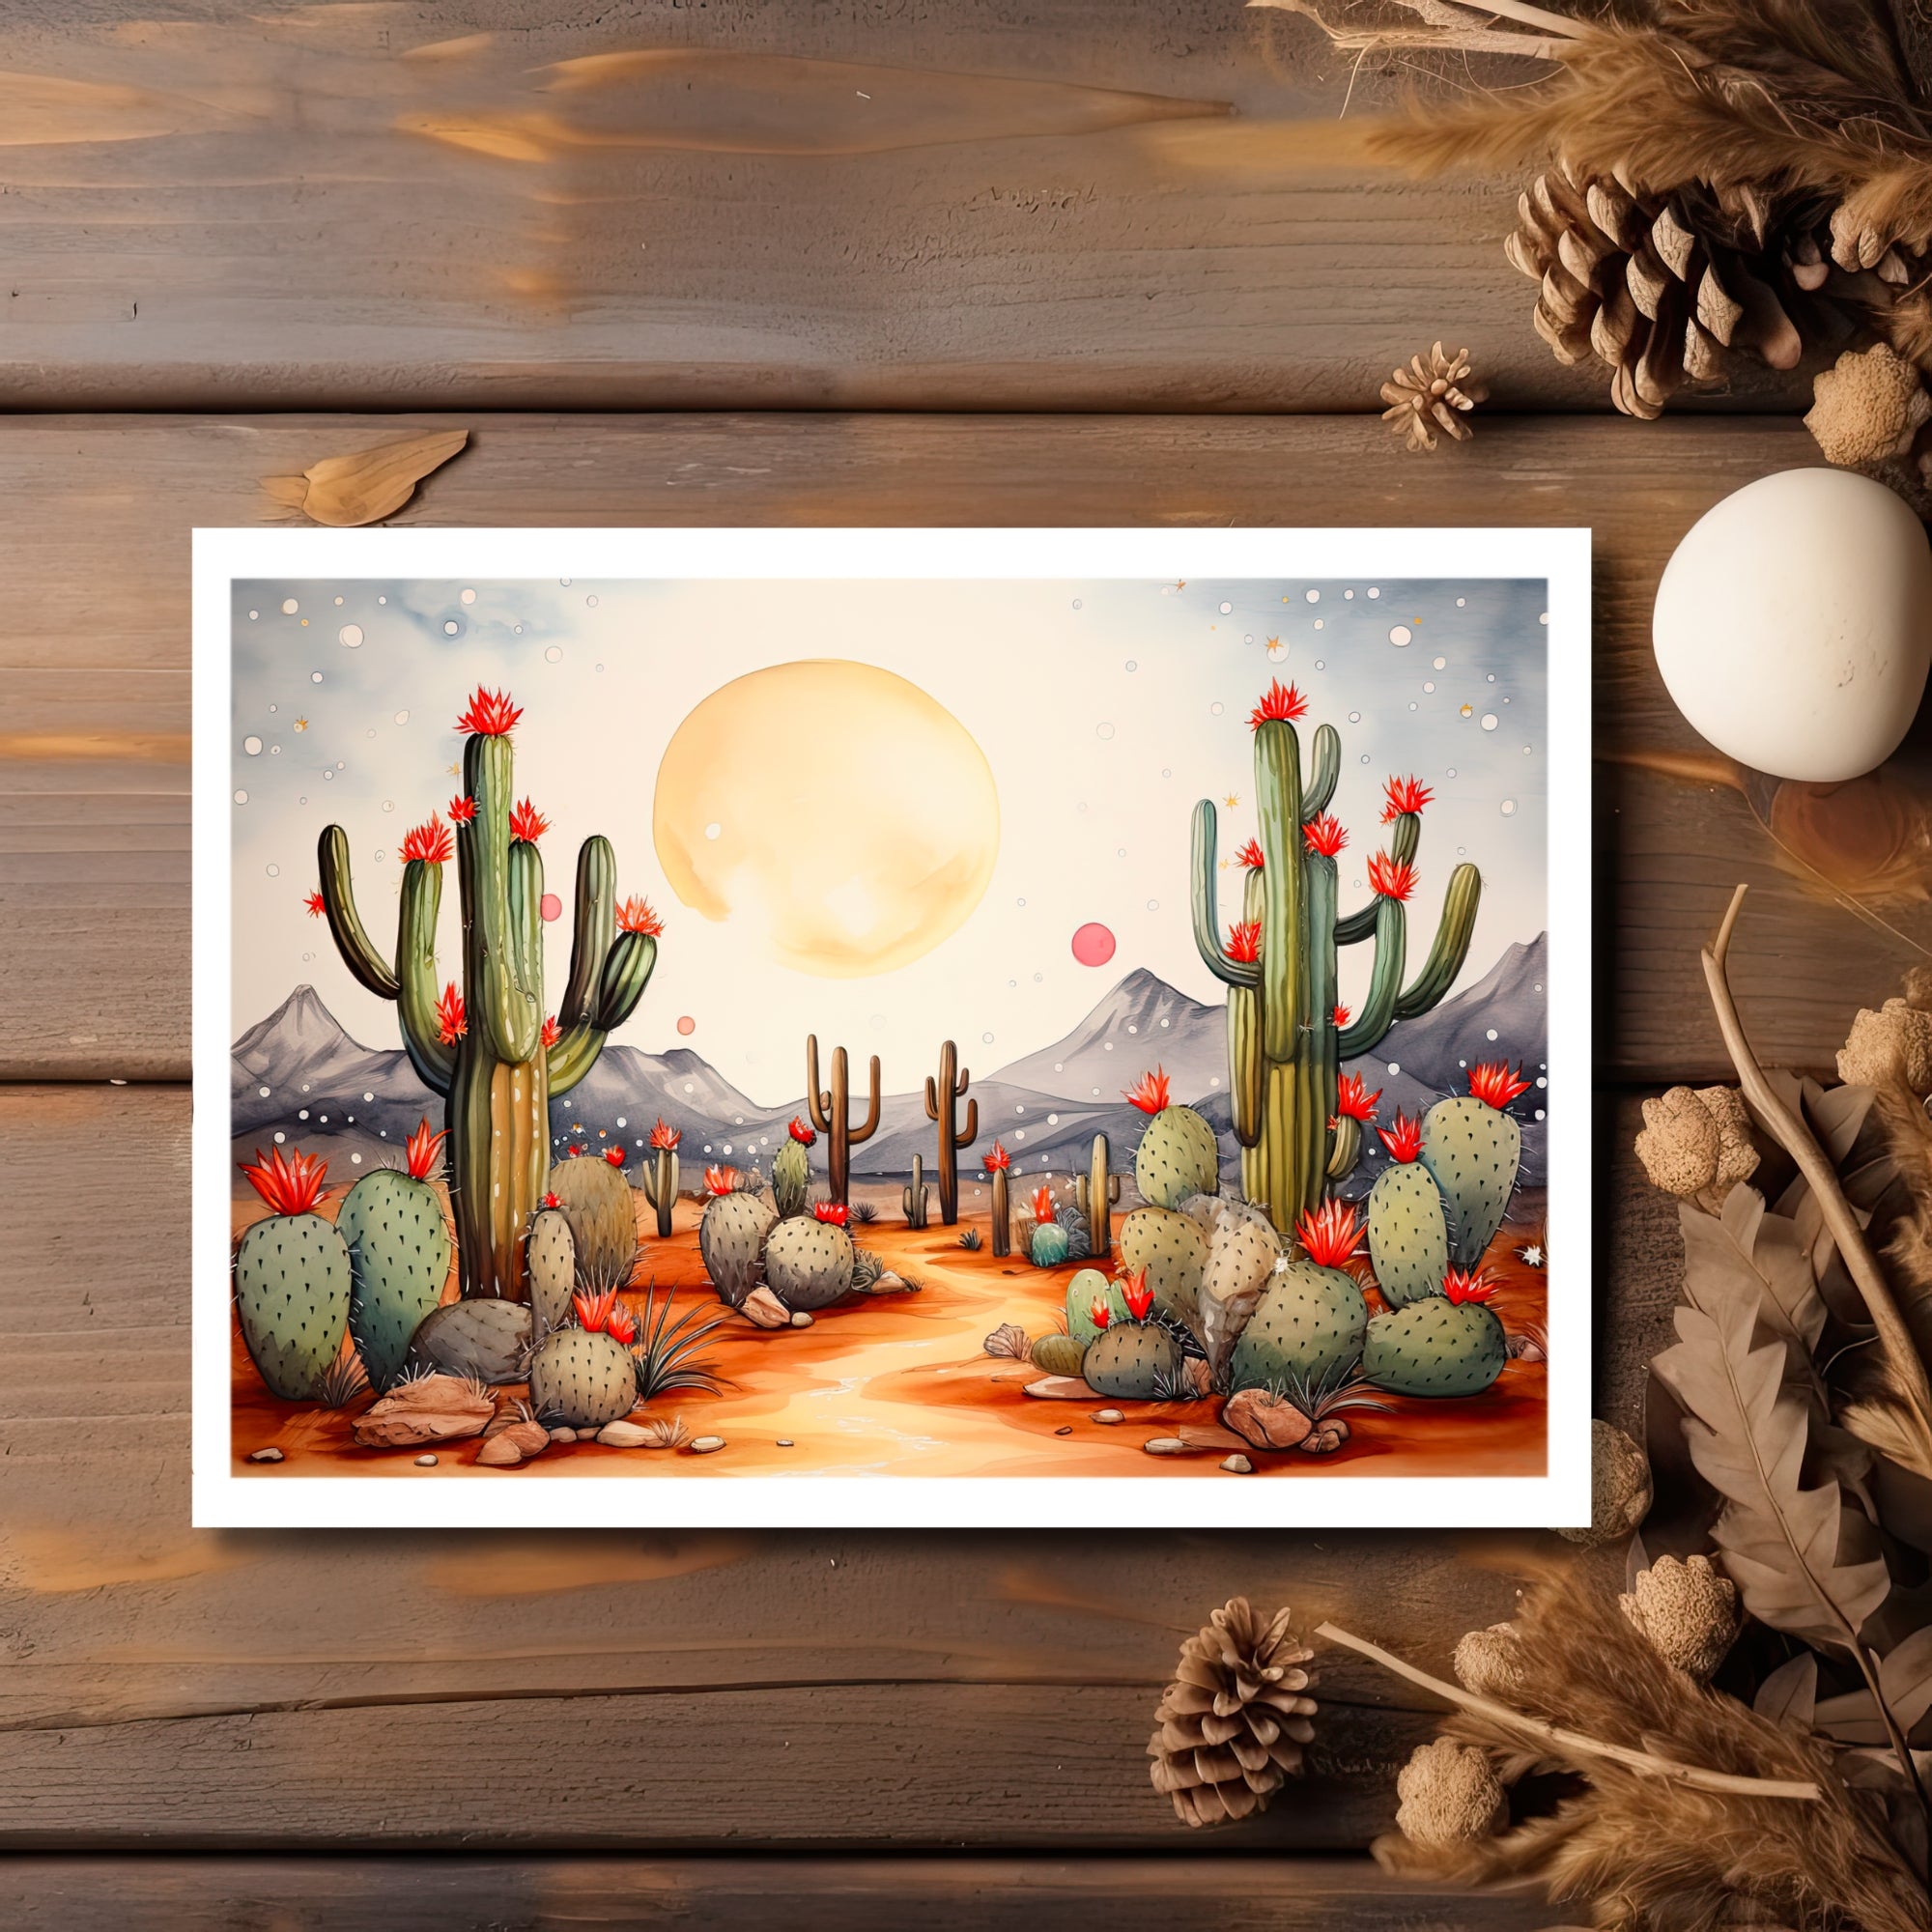 The Naughty Equestrian Wholesale Supplier Desert Prickly Cactus Greeting Card